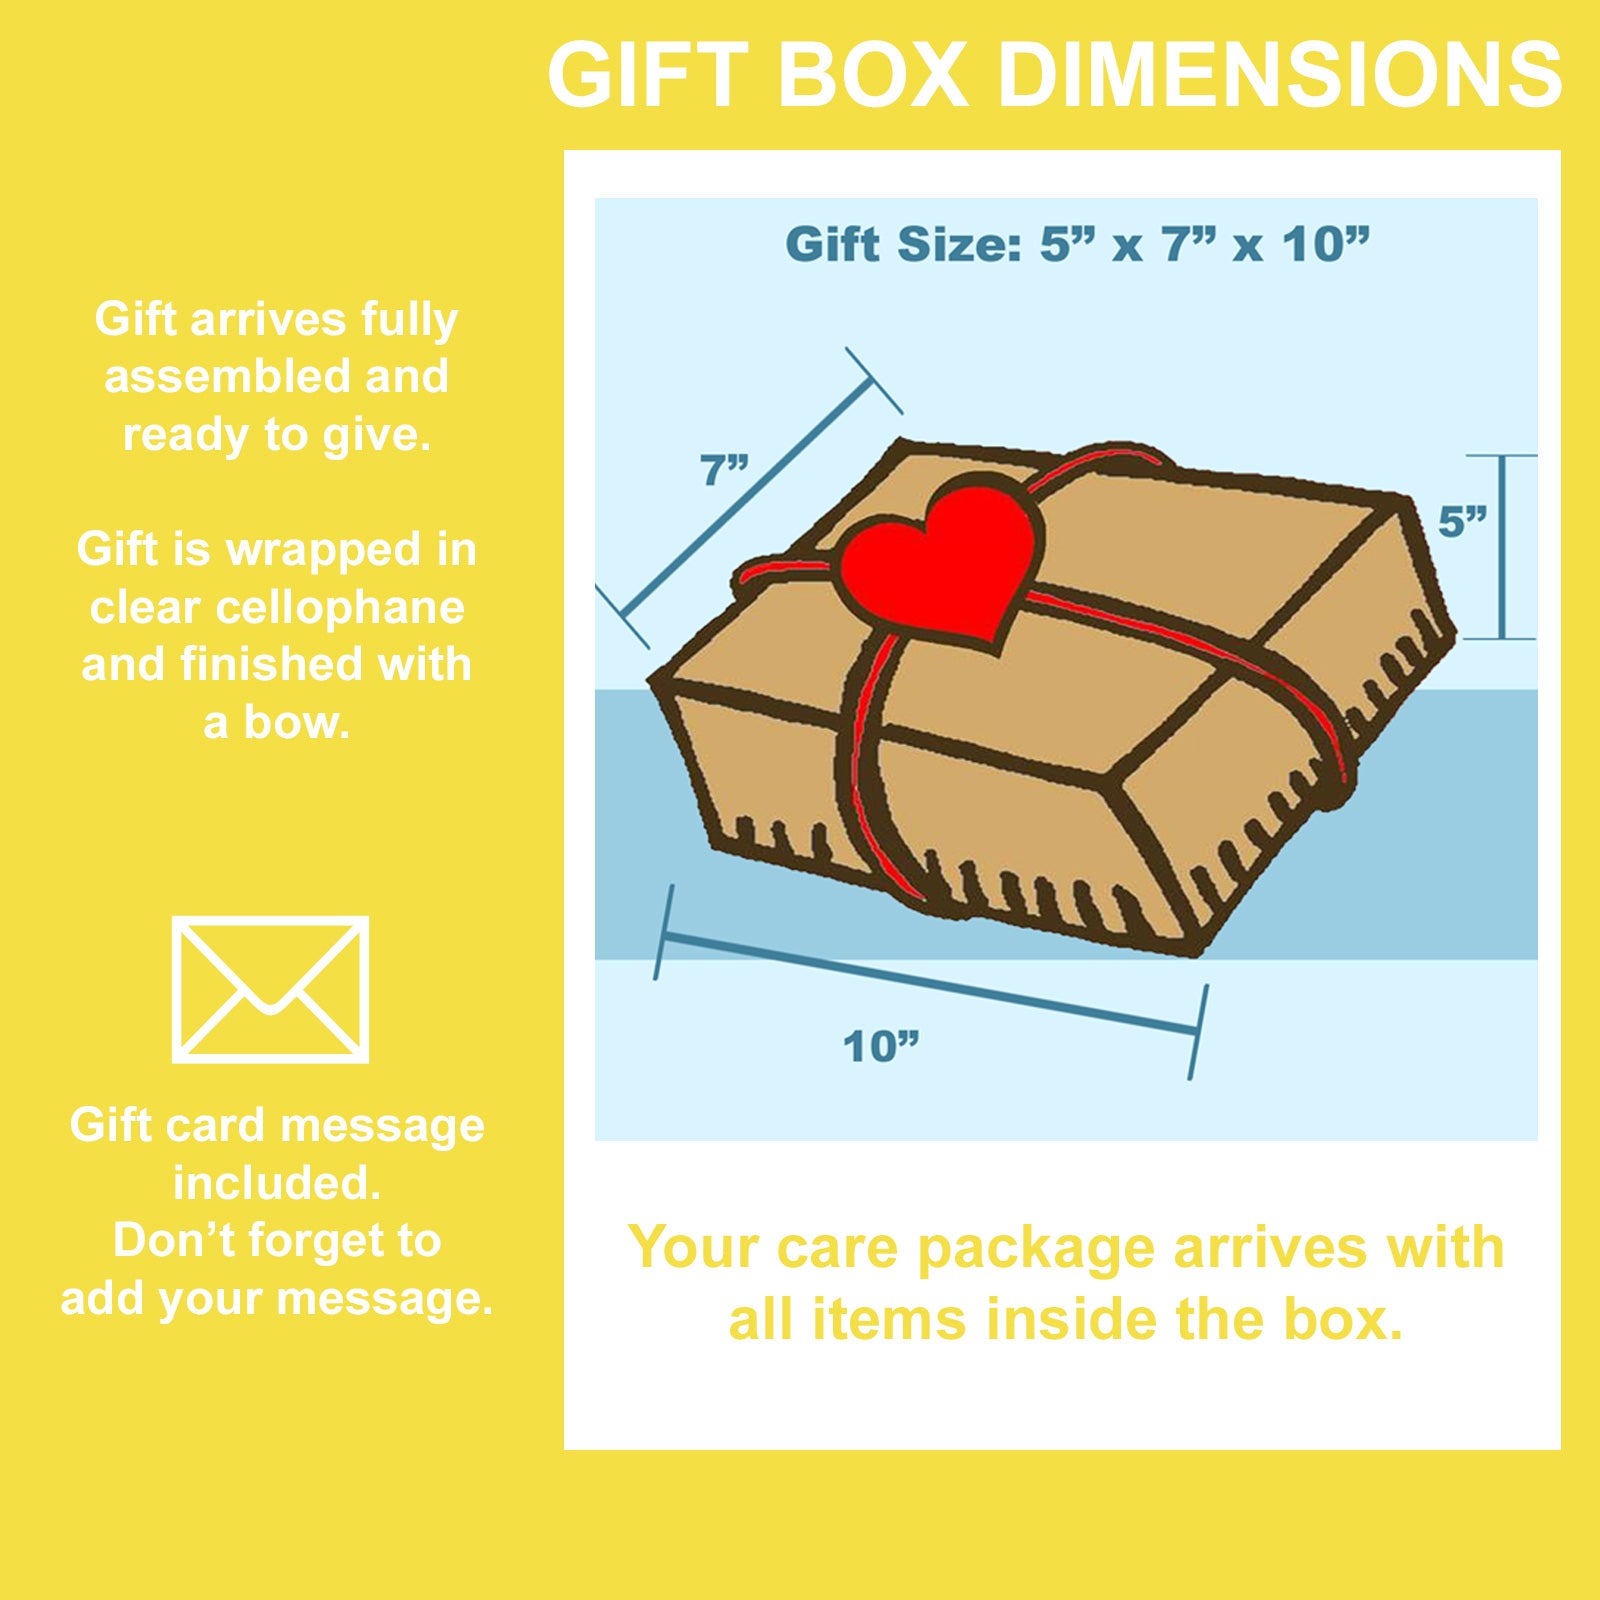 Get Well Care Package for Men, Women, Students, Military, Friends and Family Gift Box has Food and Diversions for After Surgery, Recovery, Illness, Thinking of You